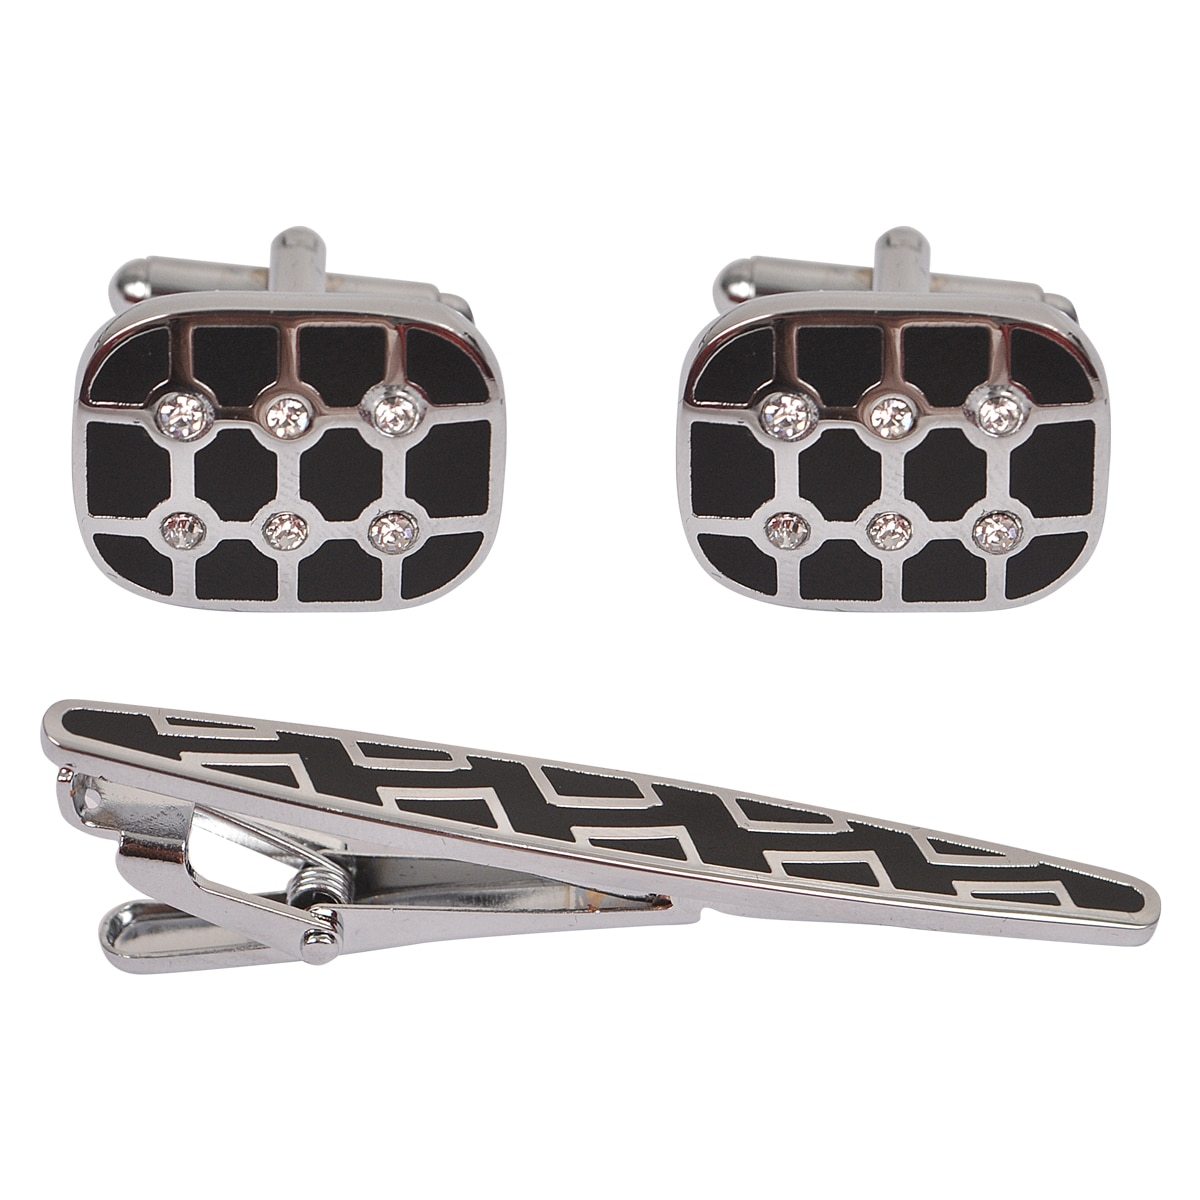 Cuff-link and Tie Bar Set CTB2501 - Church Suits For Less